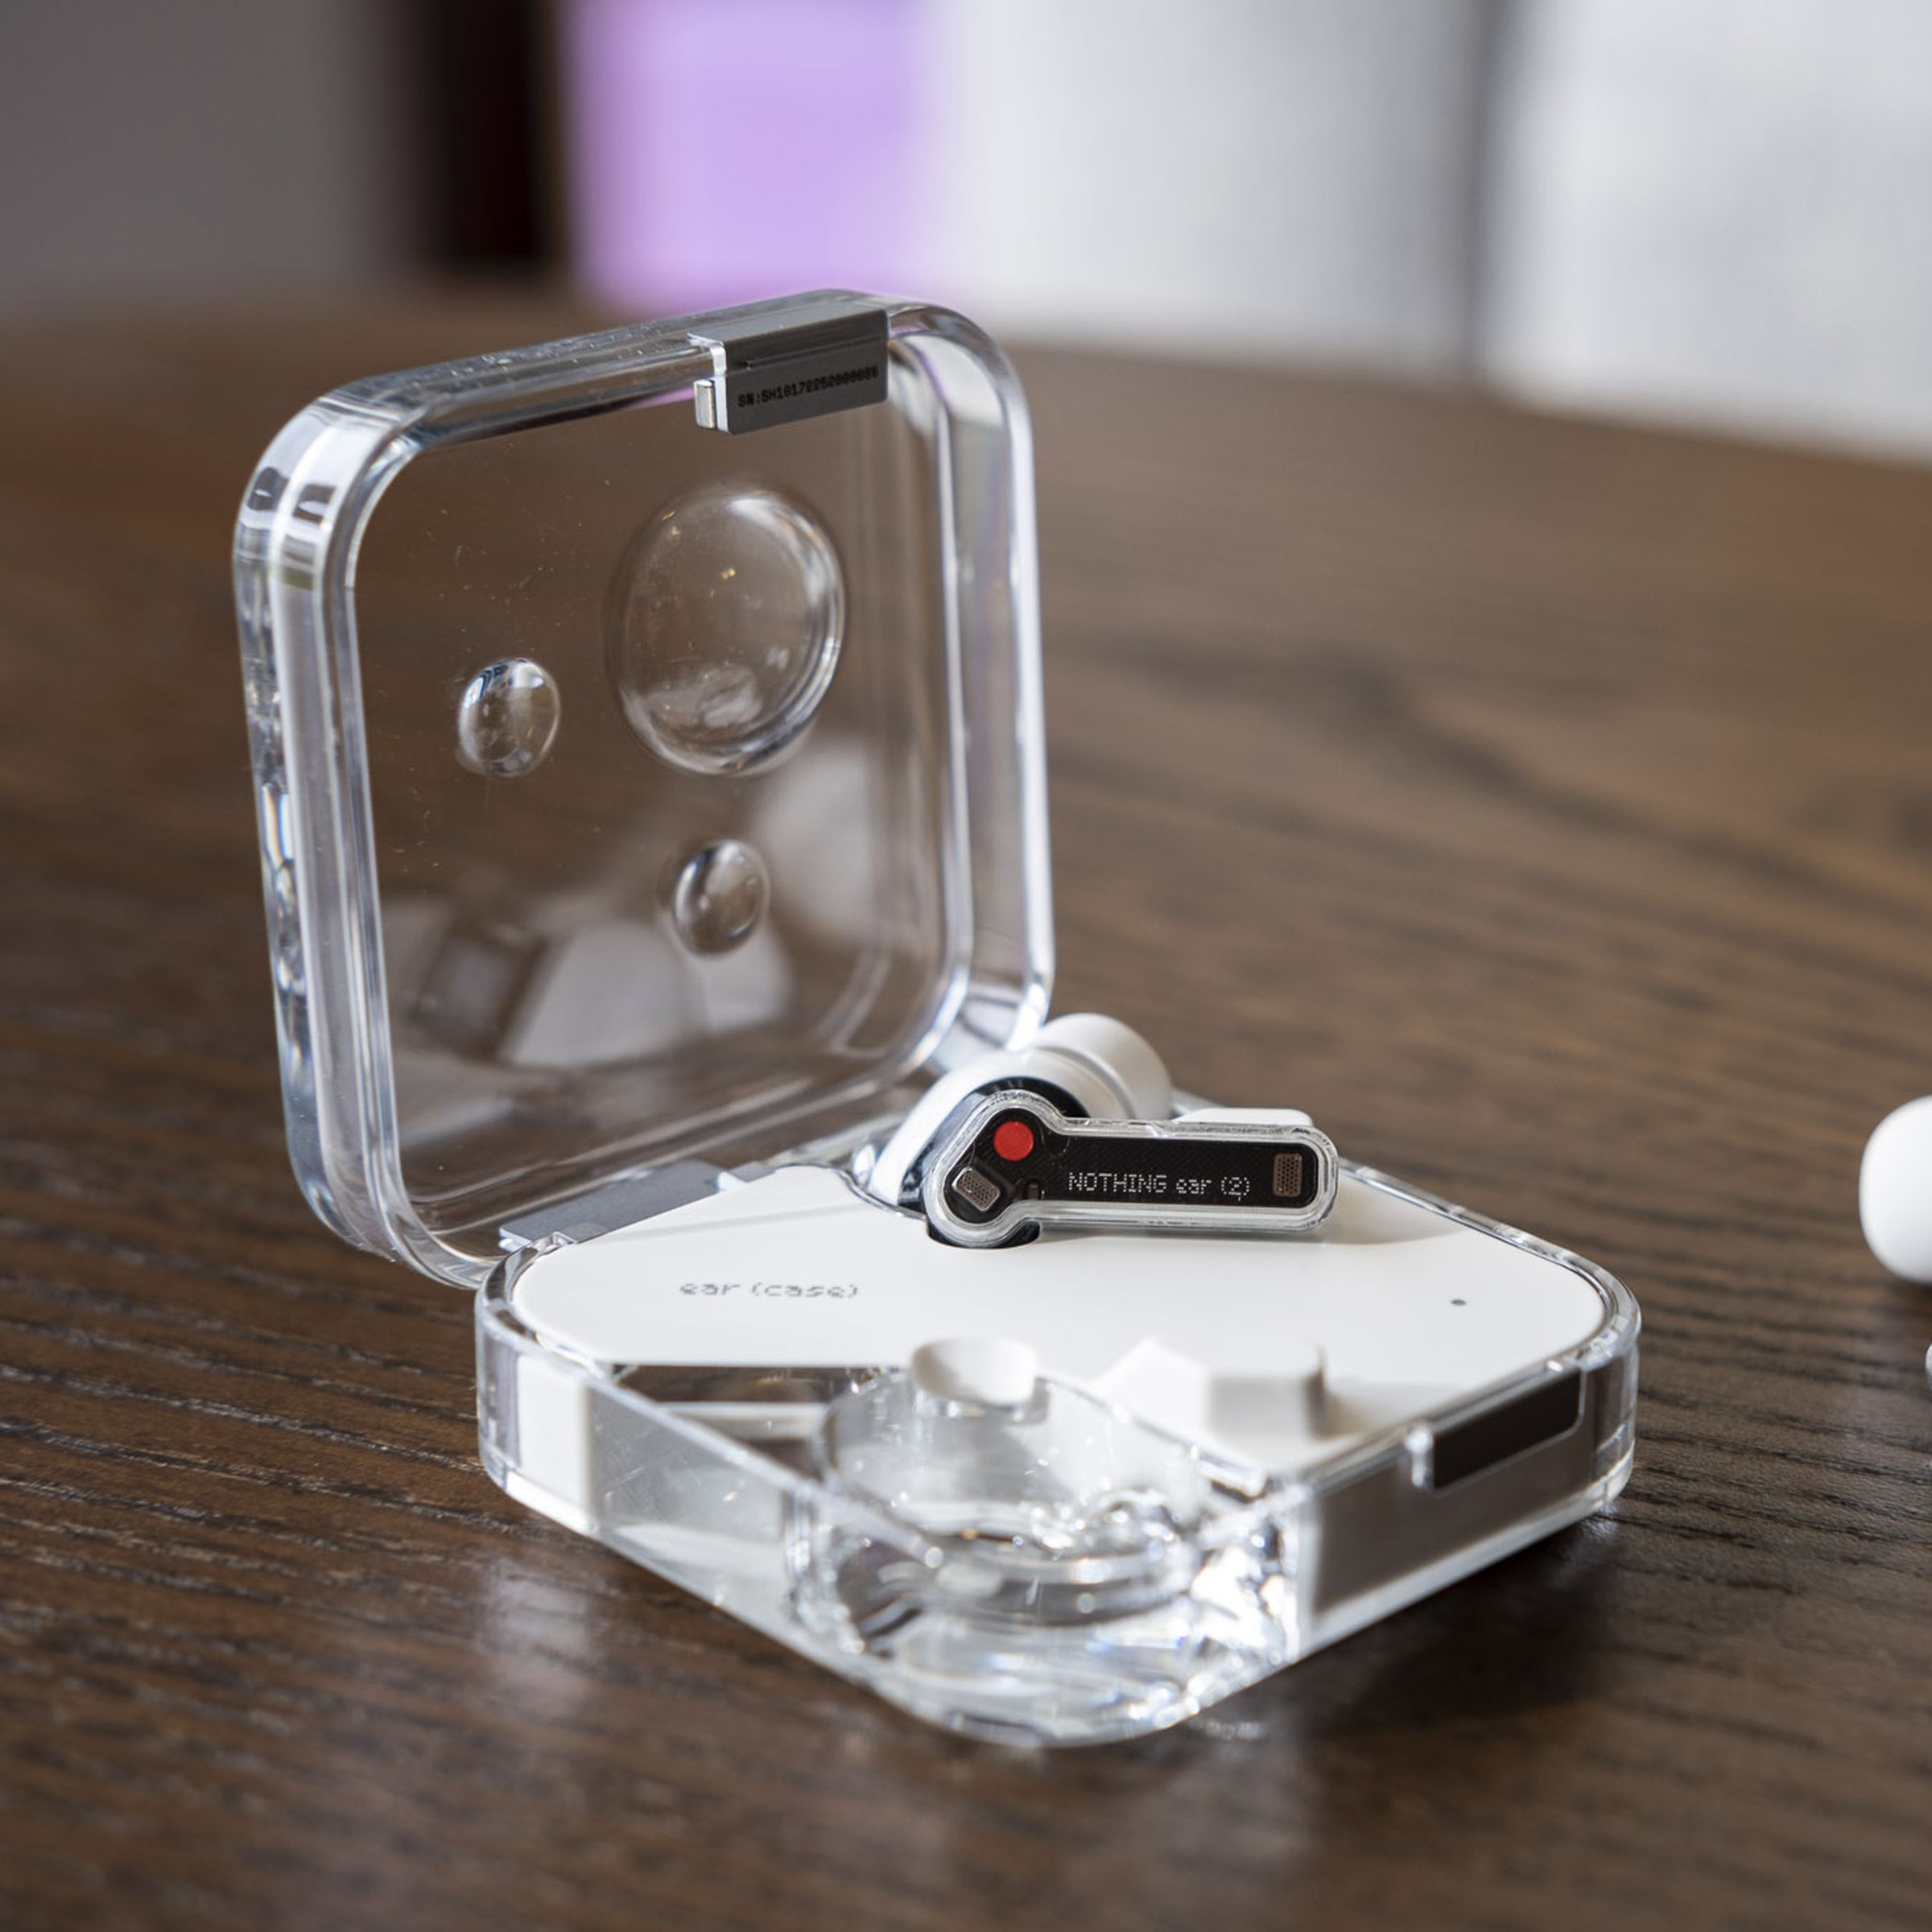 A photo of the Nothing Ear 2 earbuds with one earbud inside the charging case, and the other outside.